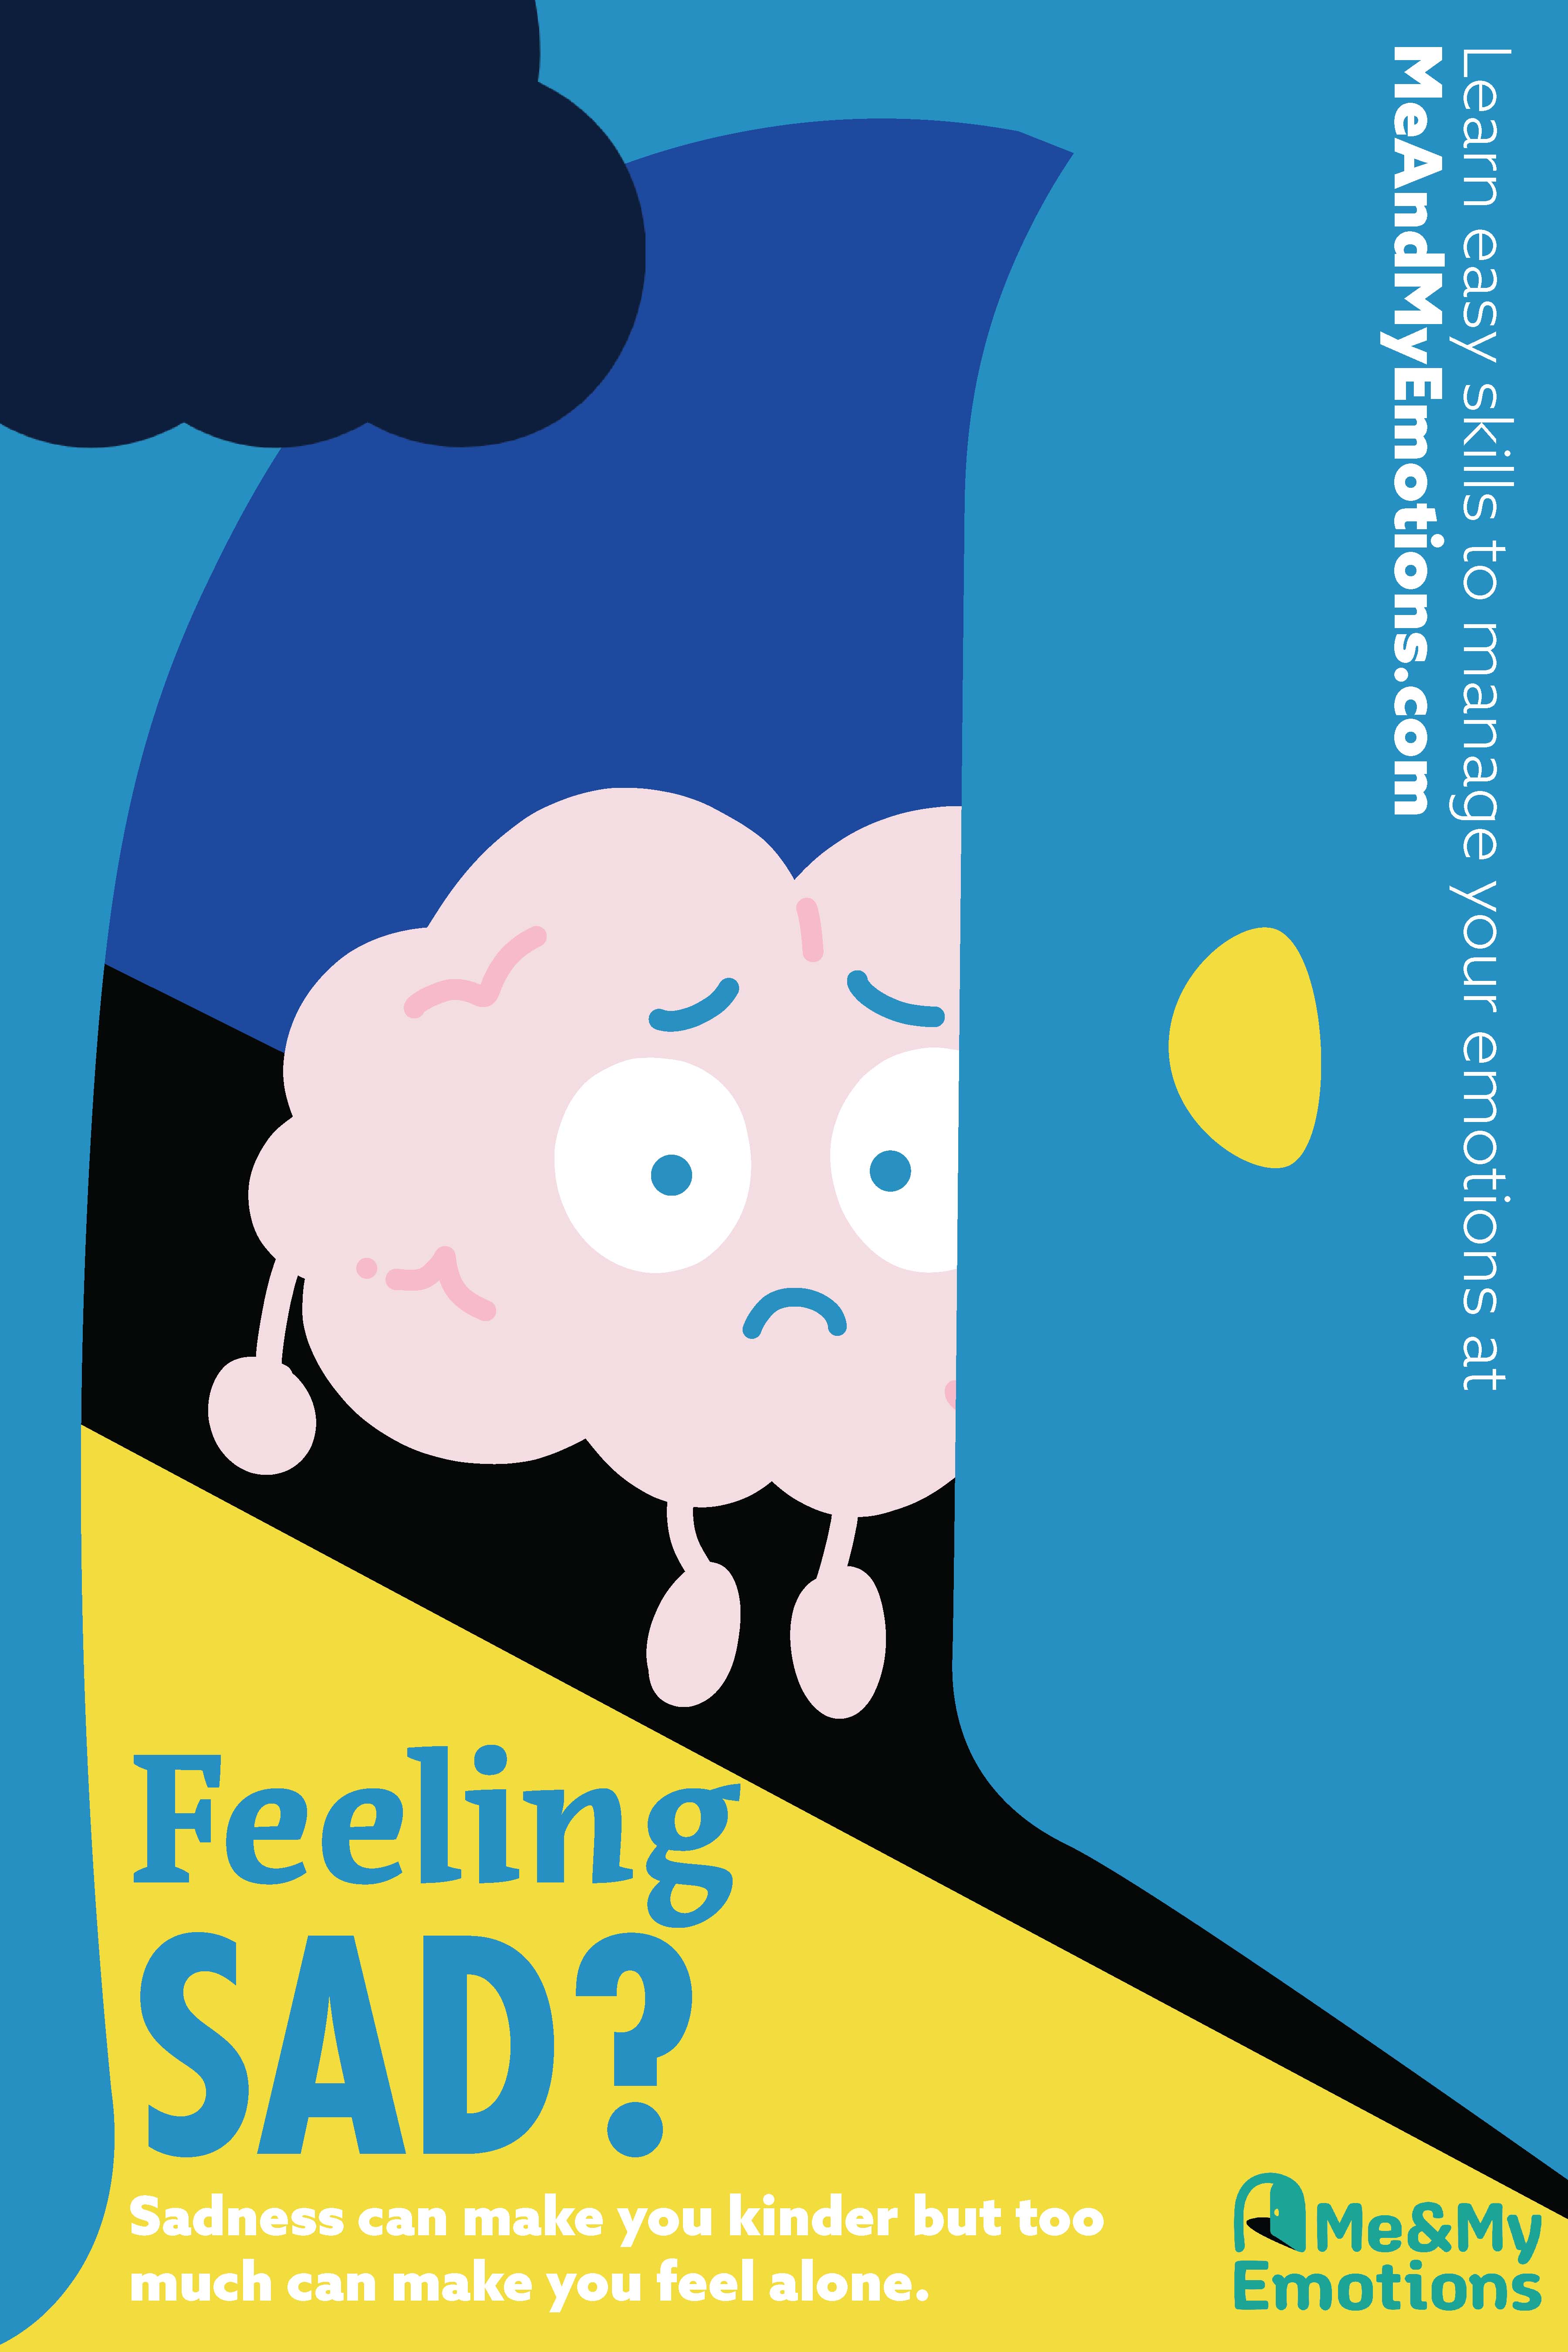 Feeling sad image from the Me and My Emotions campaign designed by ArtCenter students for a Designmatters class and implemented by a nonprofit partner to help teens with mental wellbeing.